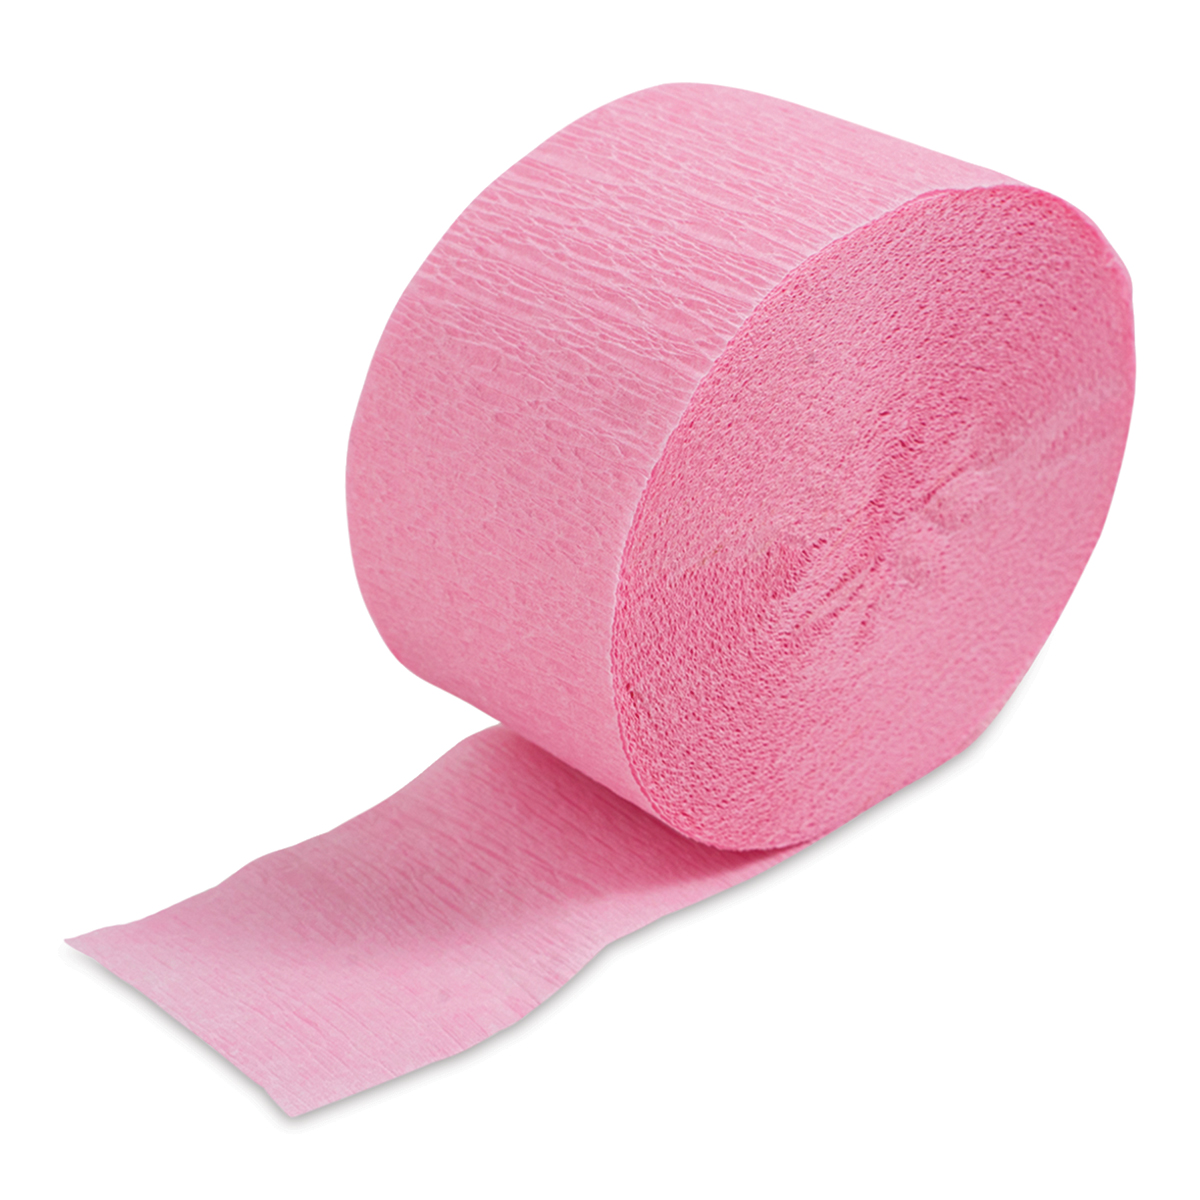 Just Artifacts 70g Premium Crepe Paper Rolls - 8ft Length/20in Width (6pcs,  Color: Shades of Pink) - Tissue Paper